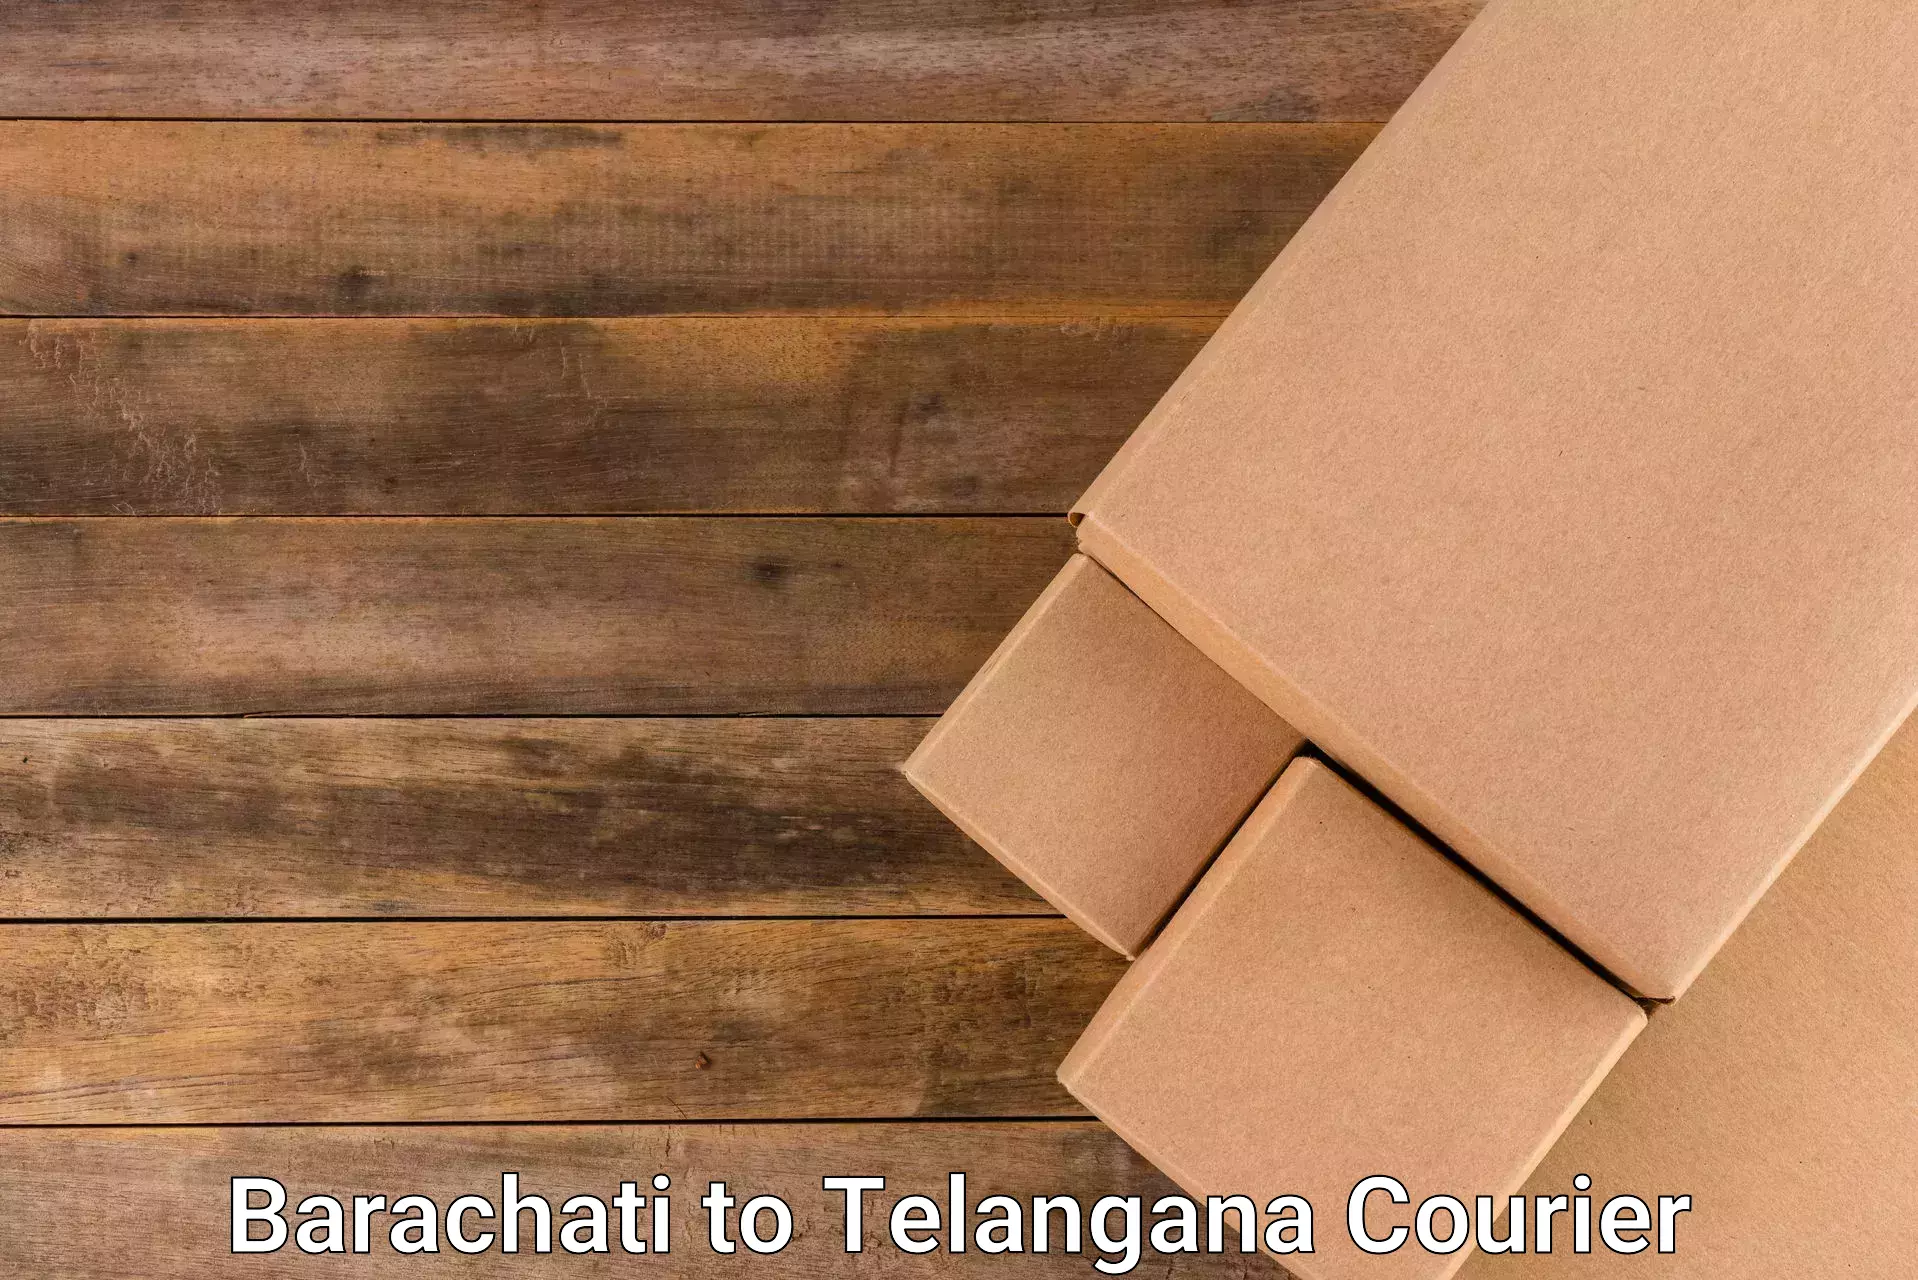 Full-service courier options Barachati to Bejjanki